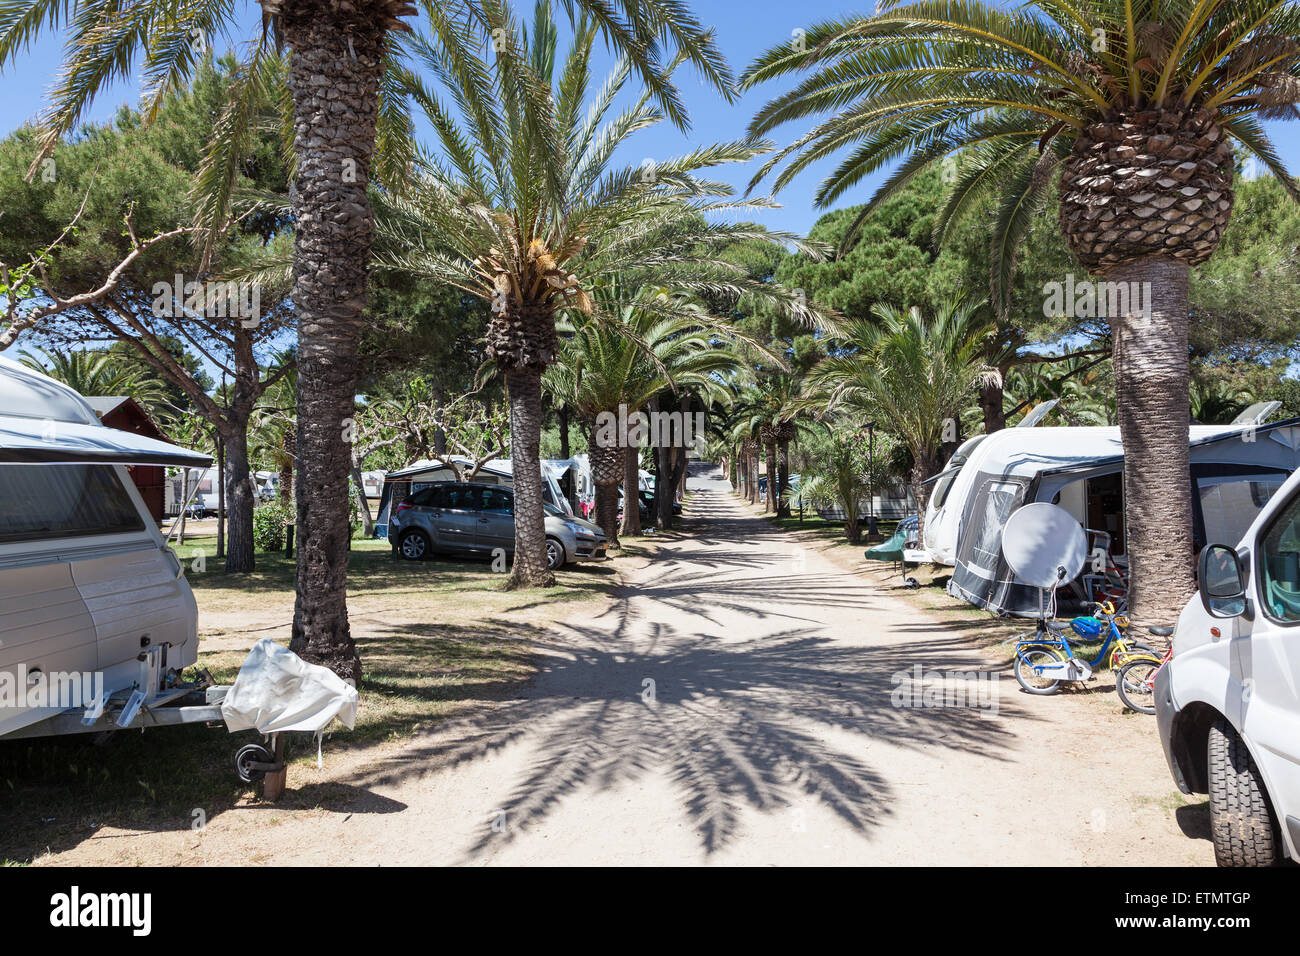 Caravans and motor homes on a camping site with palm trees. Andalusia, Spain Stock Photo